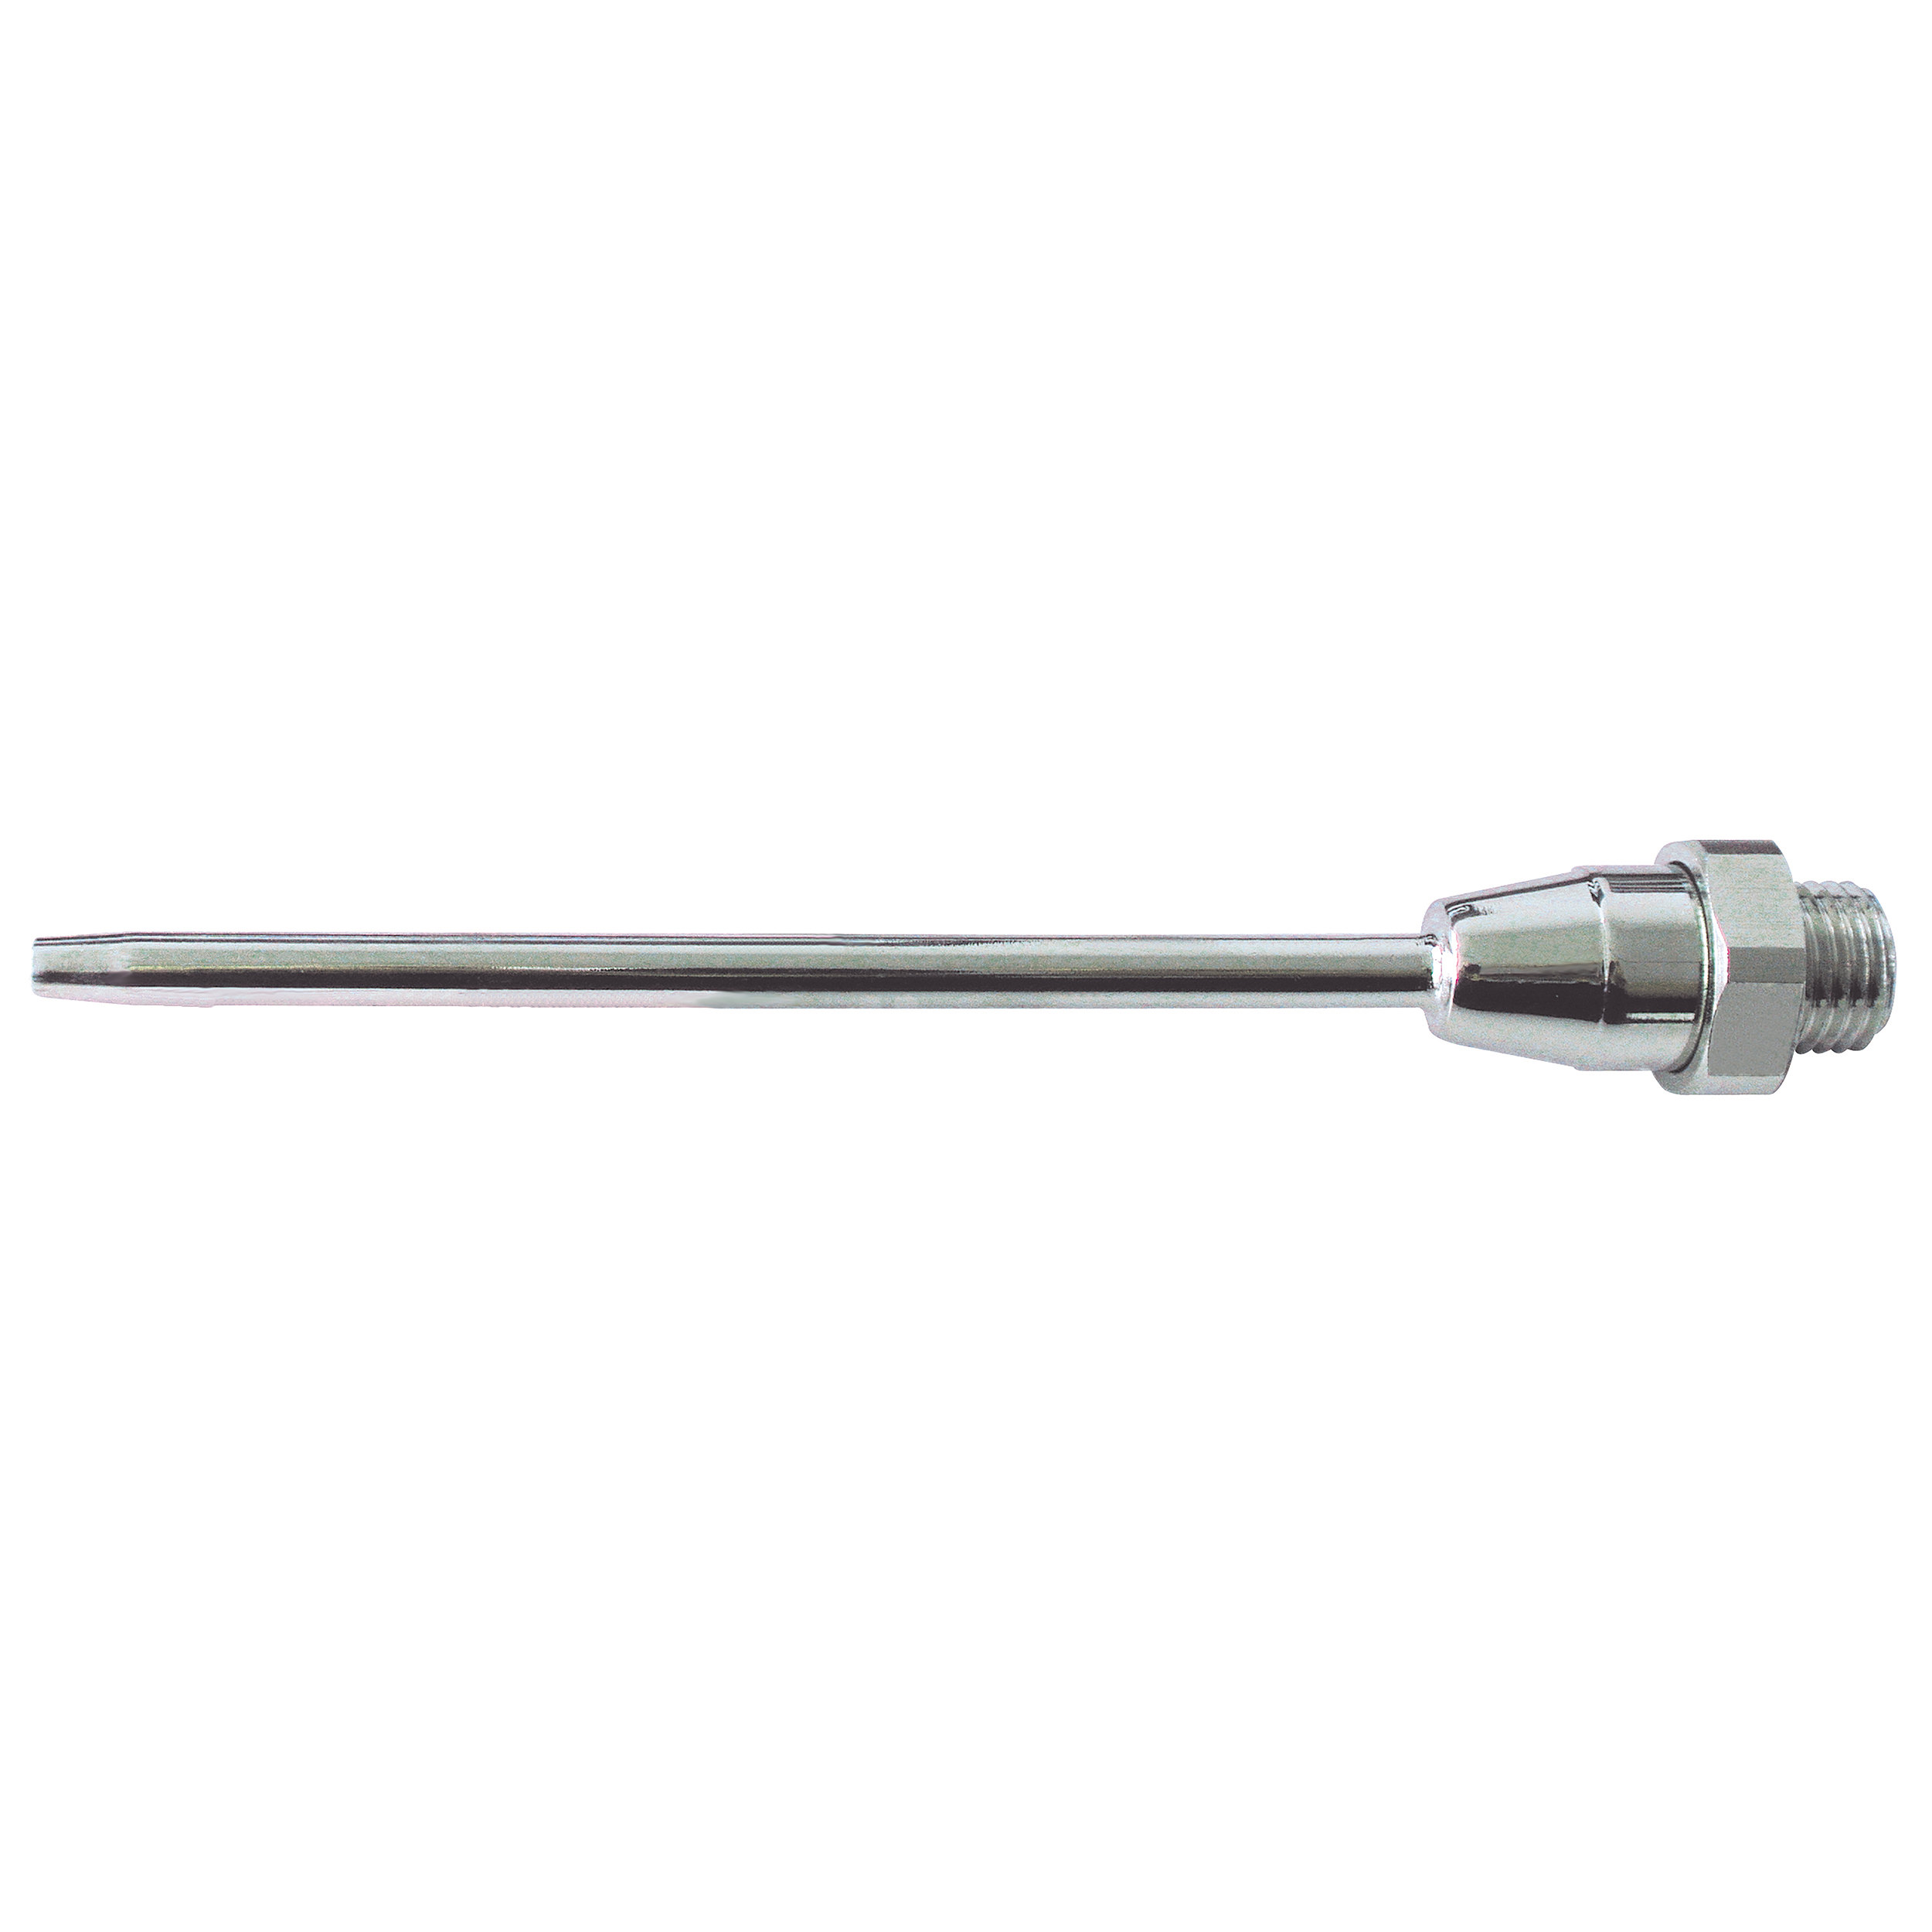 Extension nozzle, straight, length: 115 mm, connection thread: M12 × 1.25, hole-Ø3 mm, tube-Ø5 mm, brass, nickel-plated